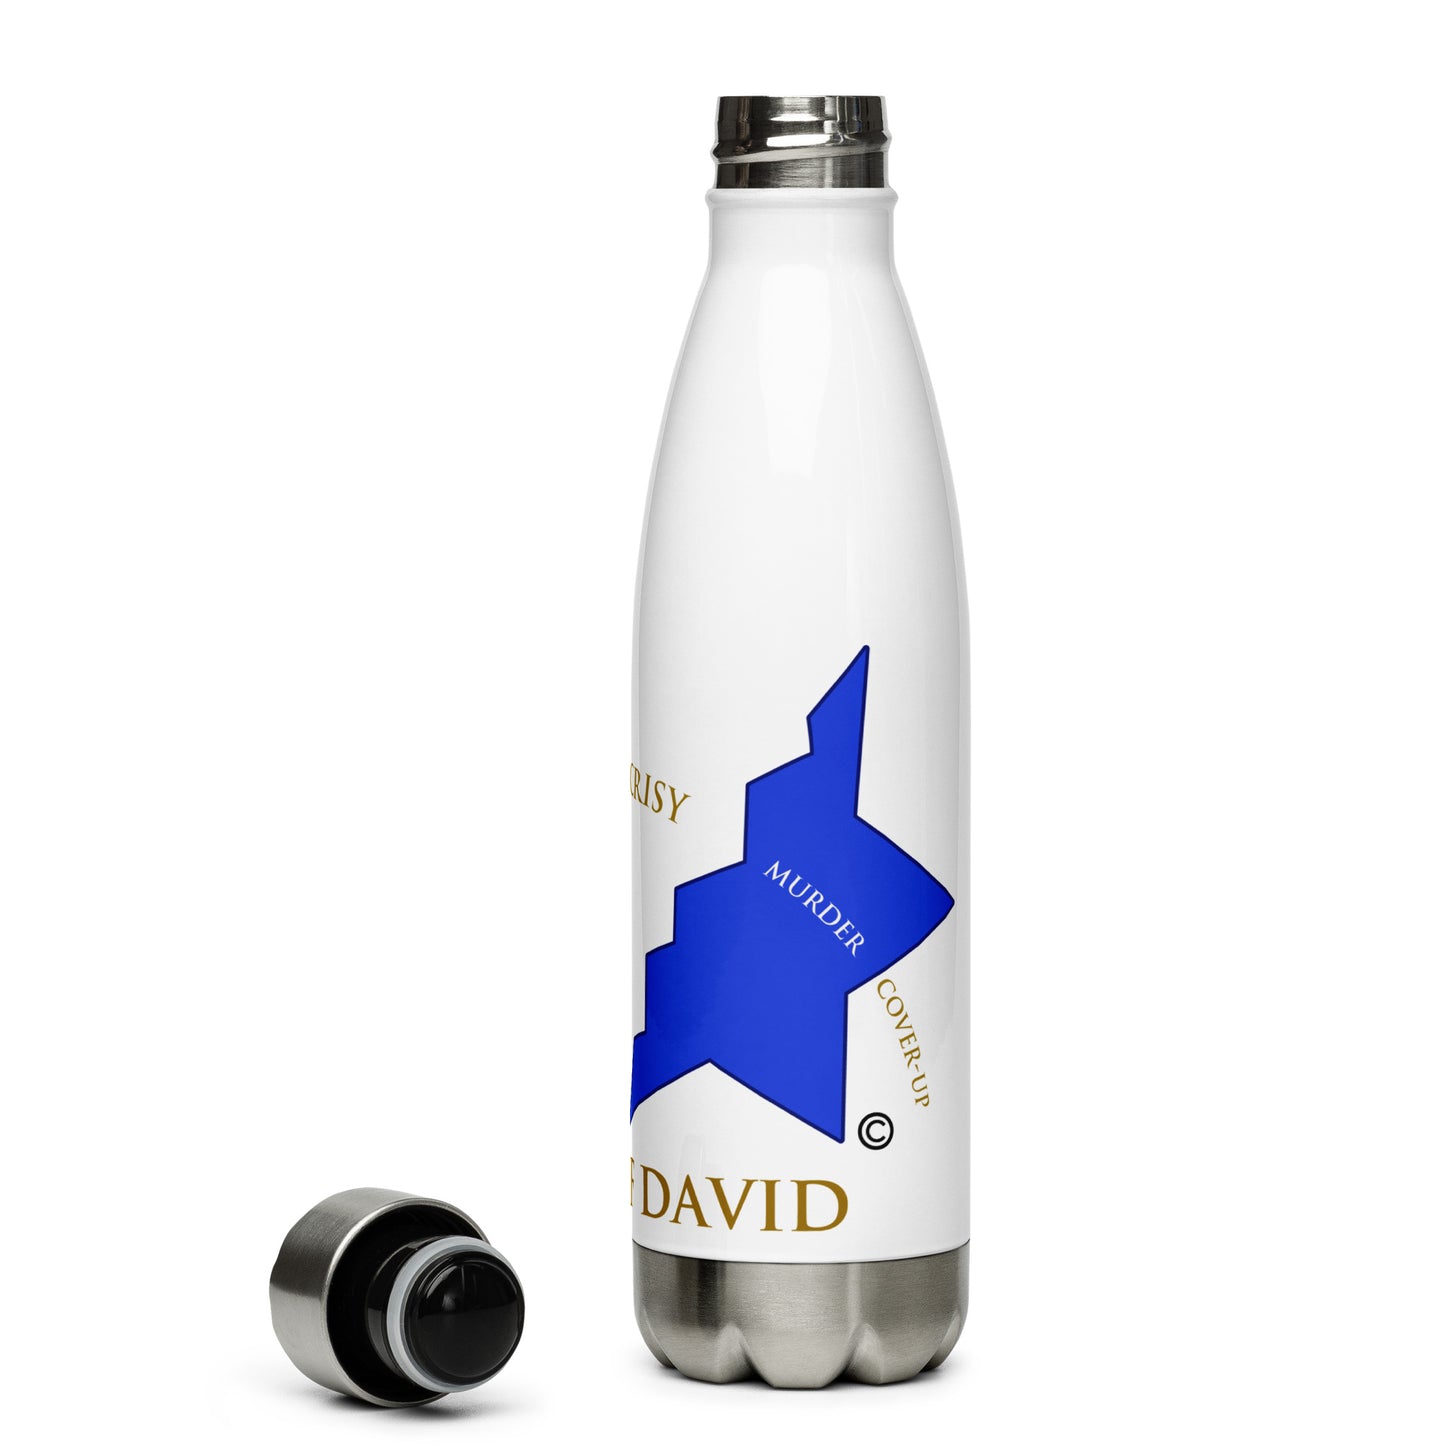 Scars of David Stainless Steel Water Bottle